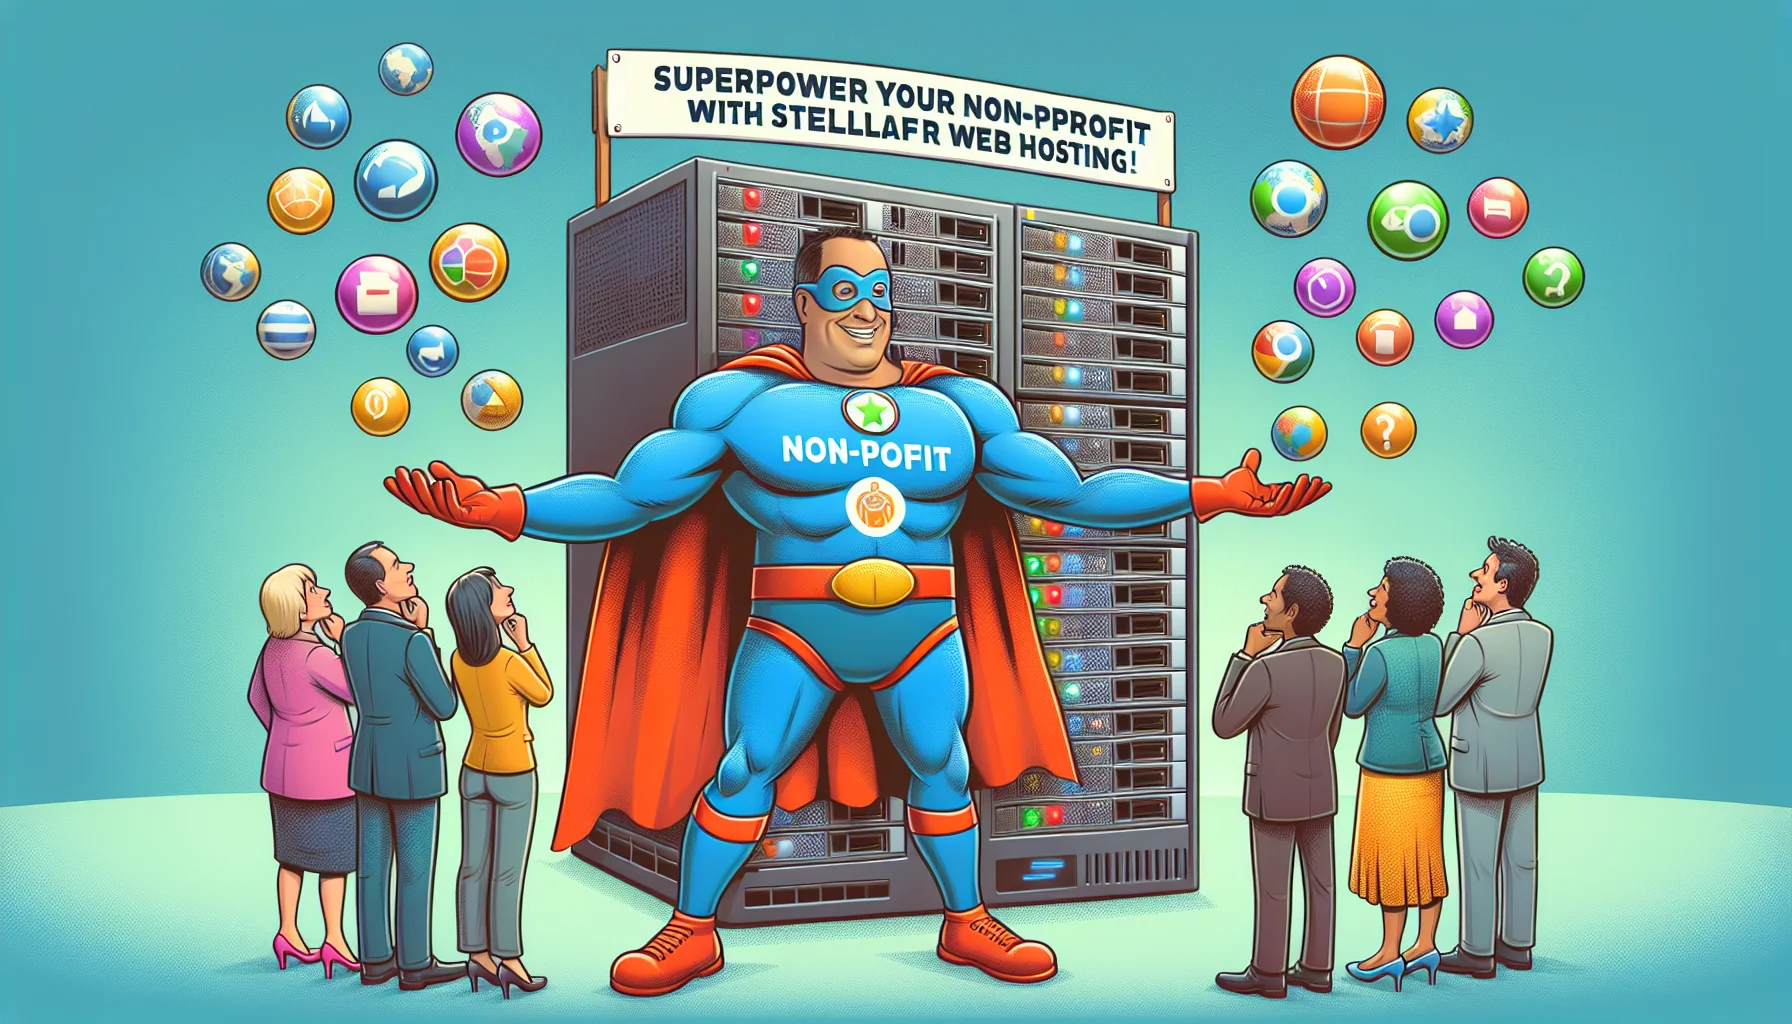 Imagine a witty and creative depiction of web hosting for nonprofits. Visualize an oversized, charmingly goofy caricature of a computer server dressed in superhero attire, with 'Non-Profit Hero' emblazoned on its chest. It is juggling various internet browsers represented as colorful globes. Beneath it, a diverse group of people (a Caucasian female, a Middle-Eastern male, a Hispanic female, and a South-Asian male) curiously watch the spectacle, their faces a mix of amusement and astonishment. On a banner above, the text reads: 'Superpower your Non-Profit with Stellar Web Hosting!'.